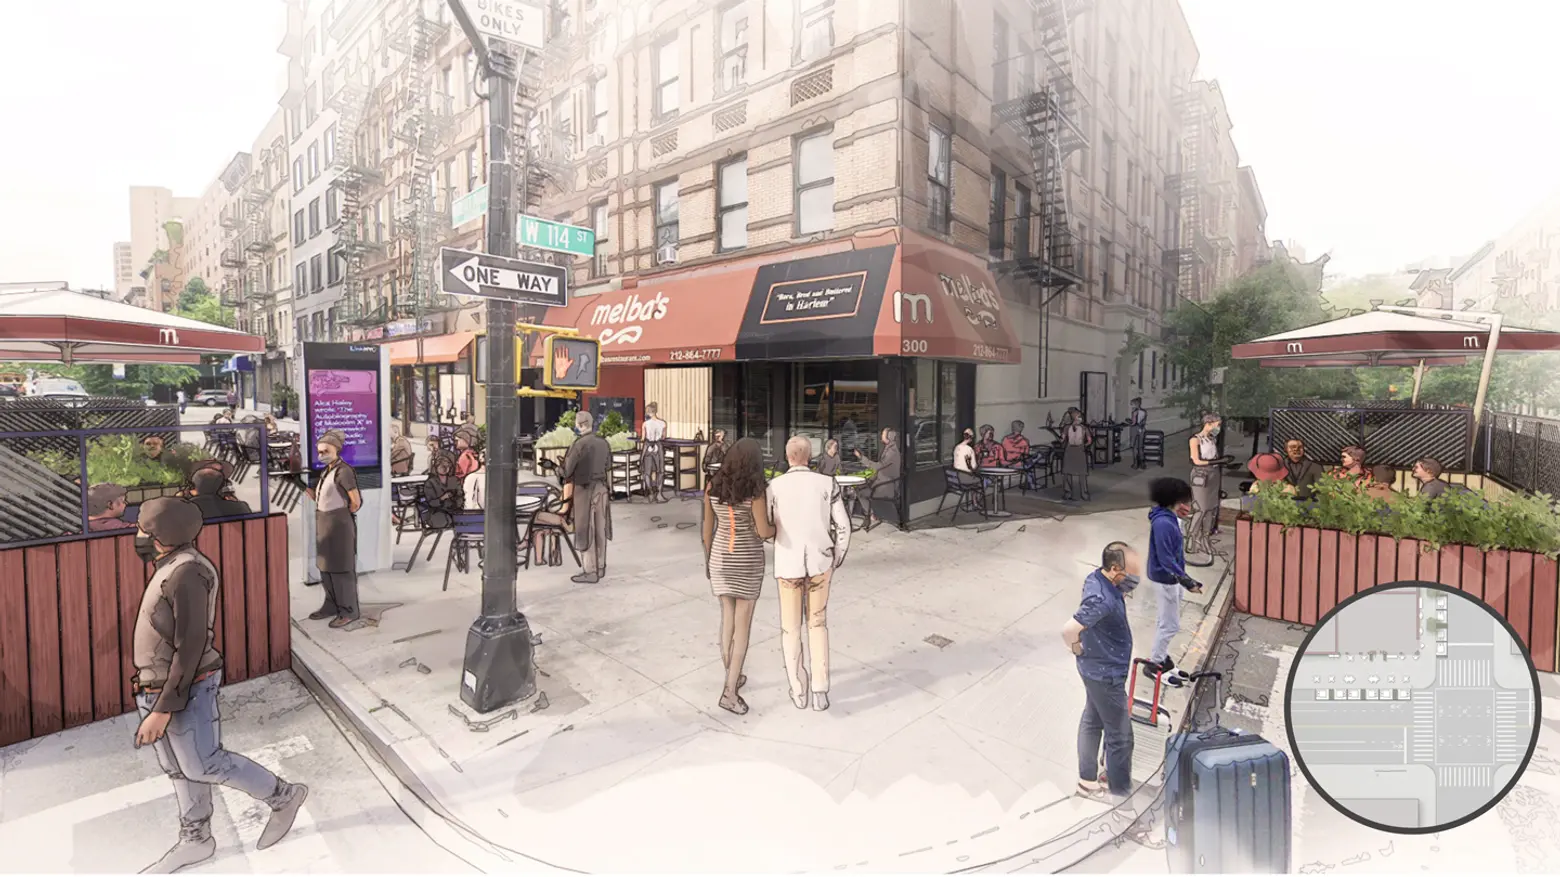 David Rockwell designs template for outdoor dining in NYC